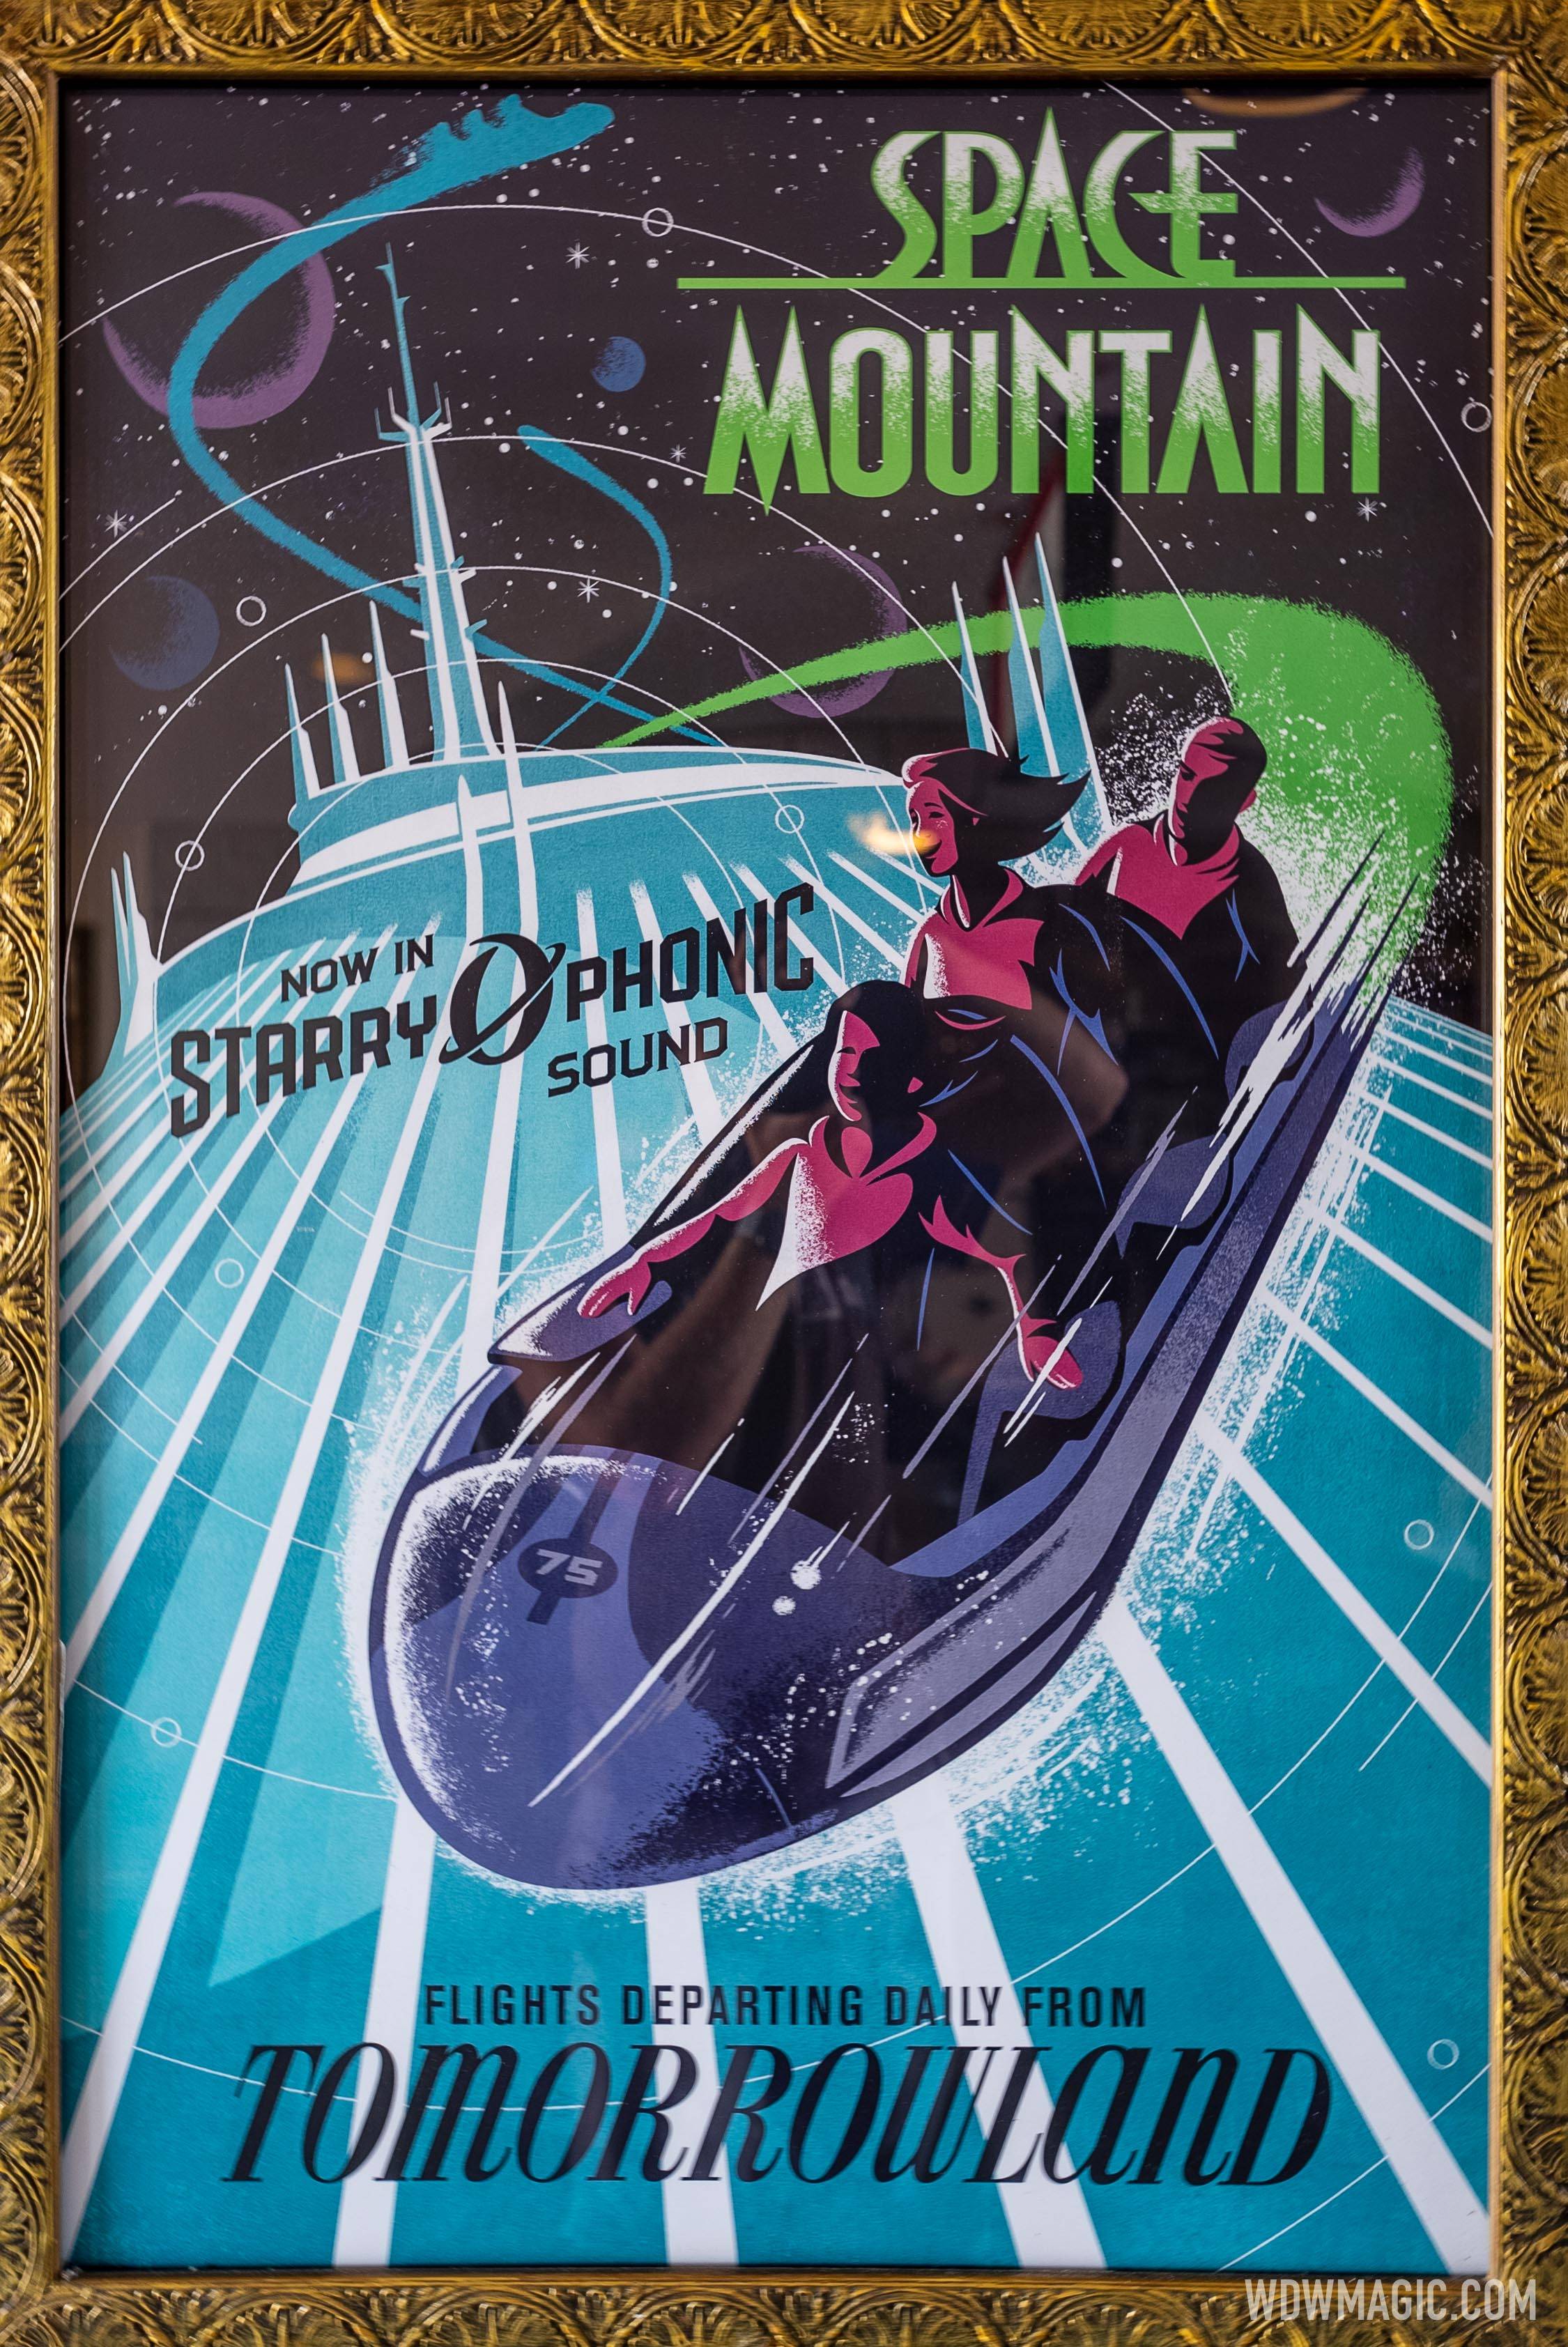 Magic Kingdom vintage attraction poster - Space Mountain